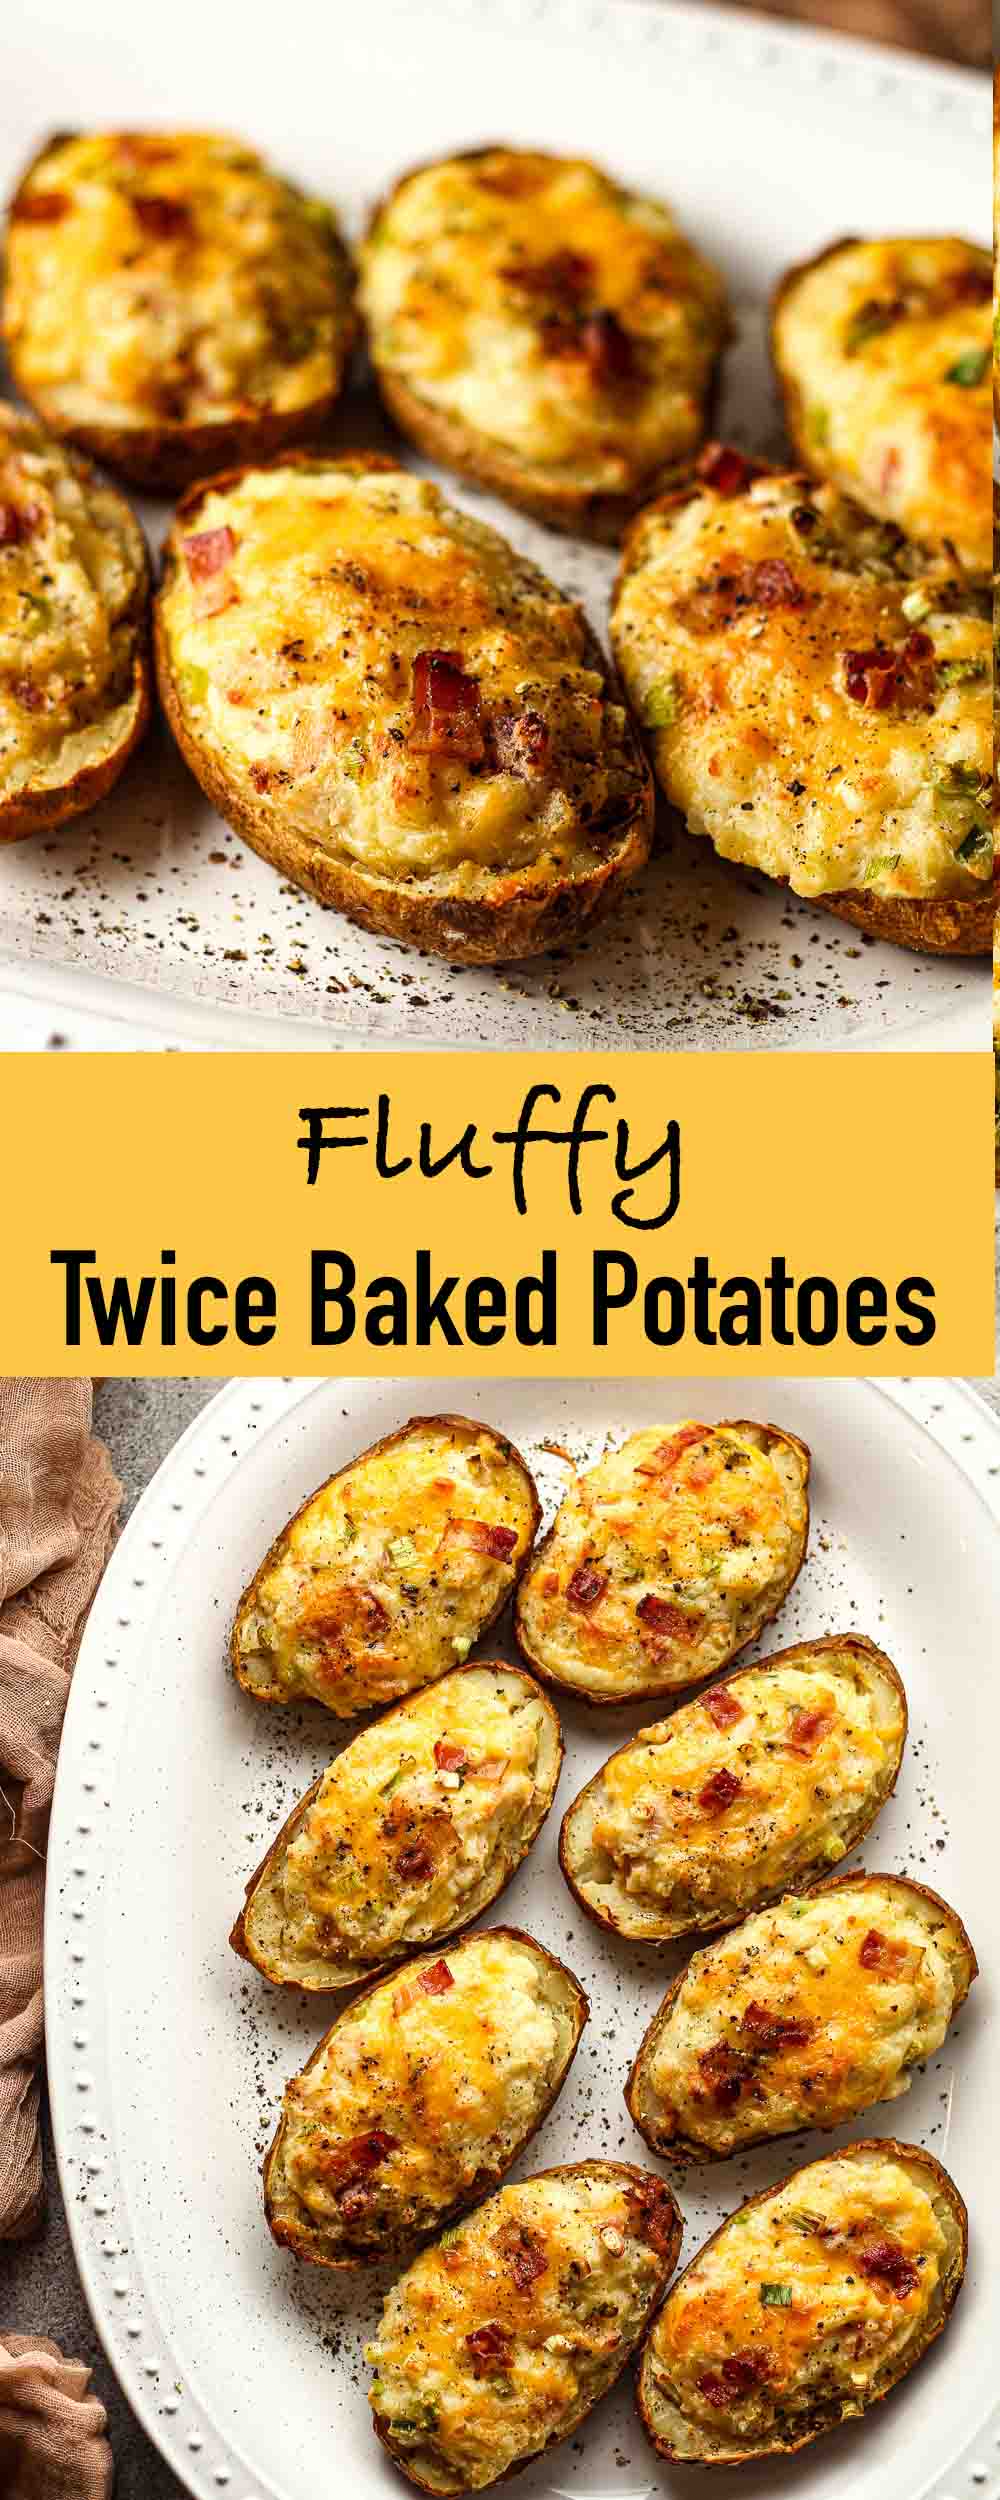 Two photos of fluffy twice baked potatoes on a platter.